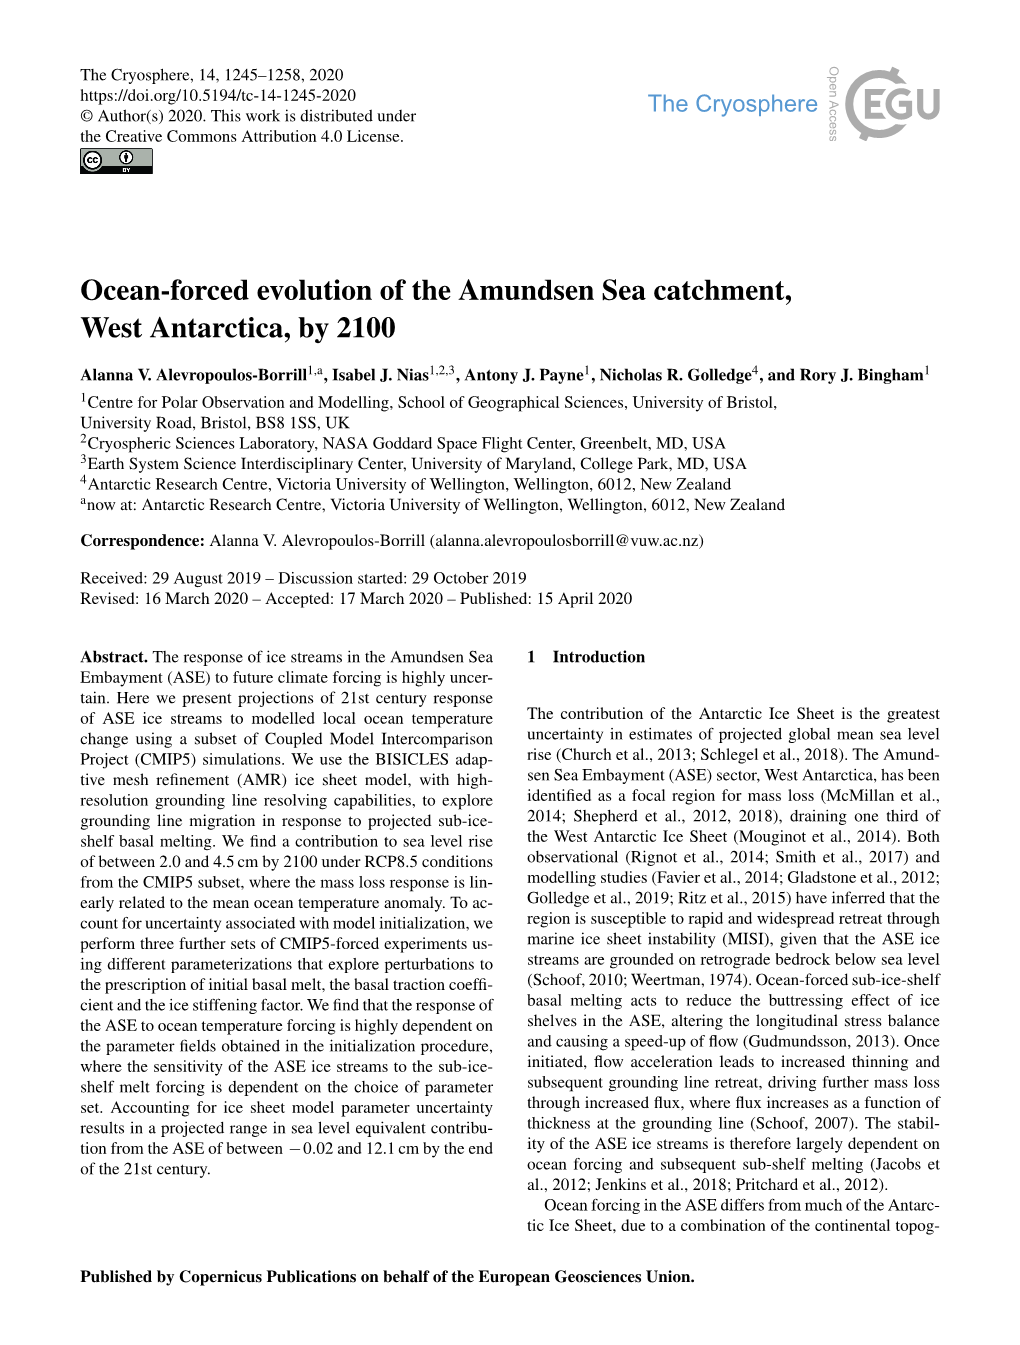 Ocean-Forced Evolution of the Amundsen Sea Catchment, West Antarctica, by 2100